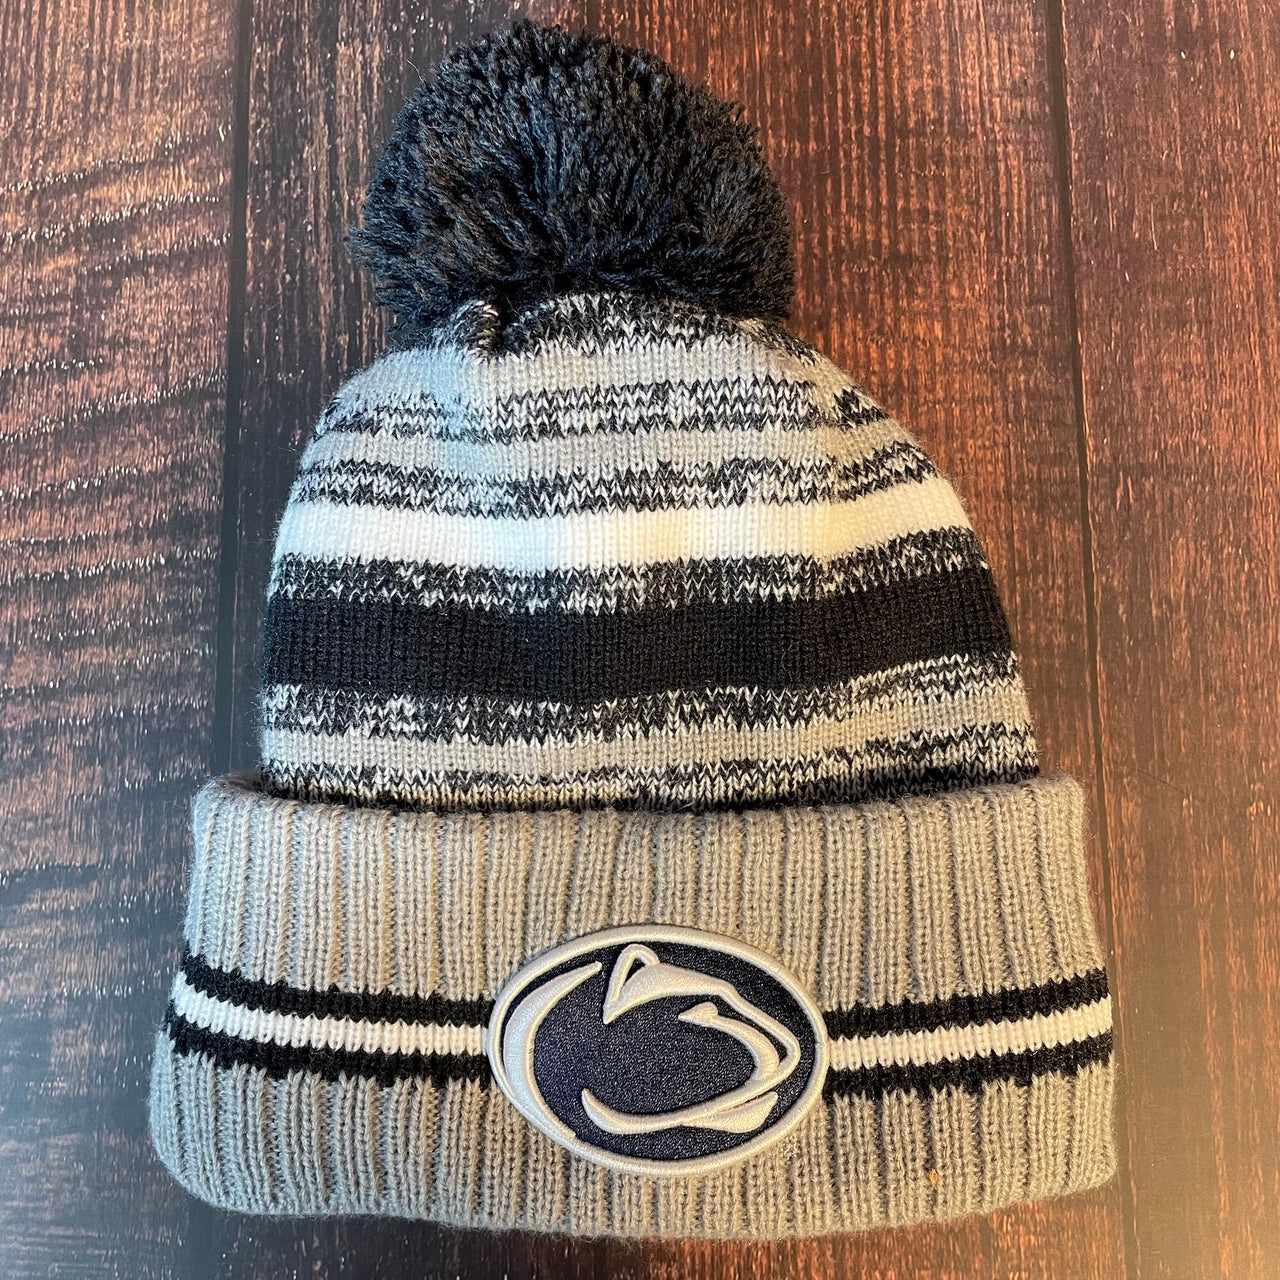 The front of the Penn State Nittany Lions 2022 Child Beanie features a Penn State Nittany Lions logo at the front raised cuff